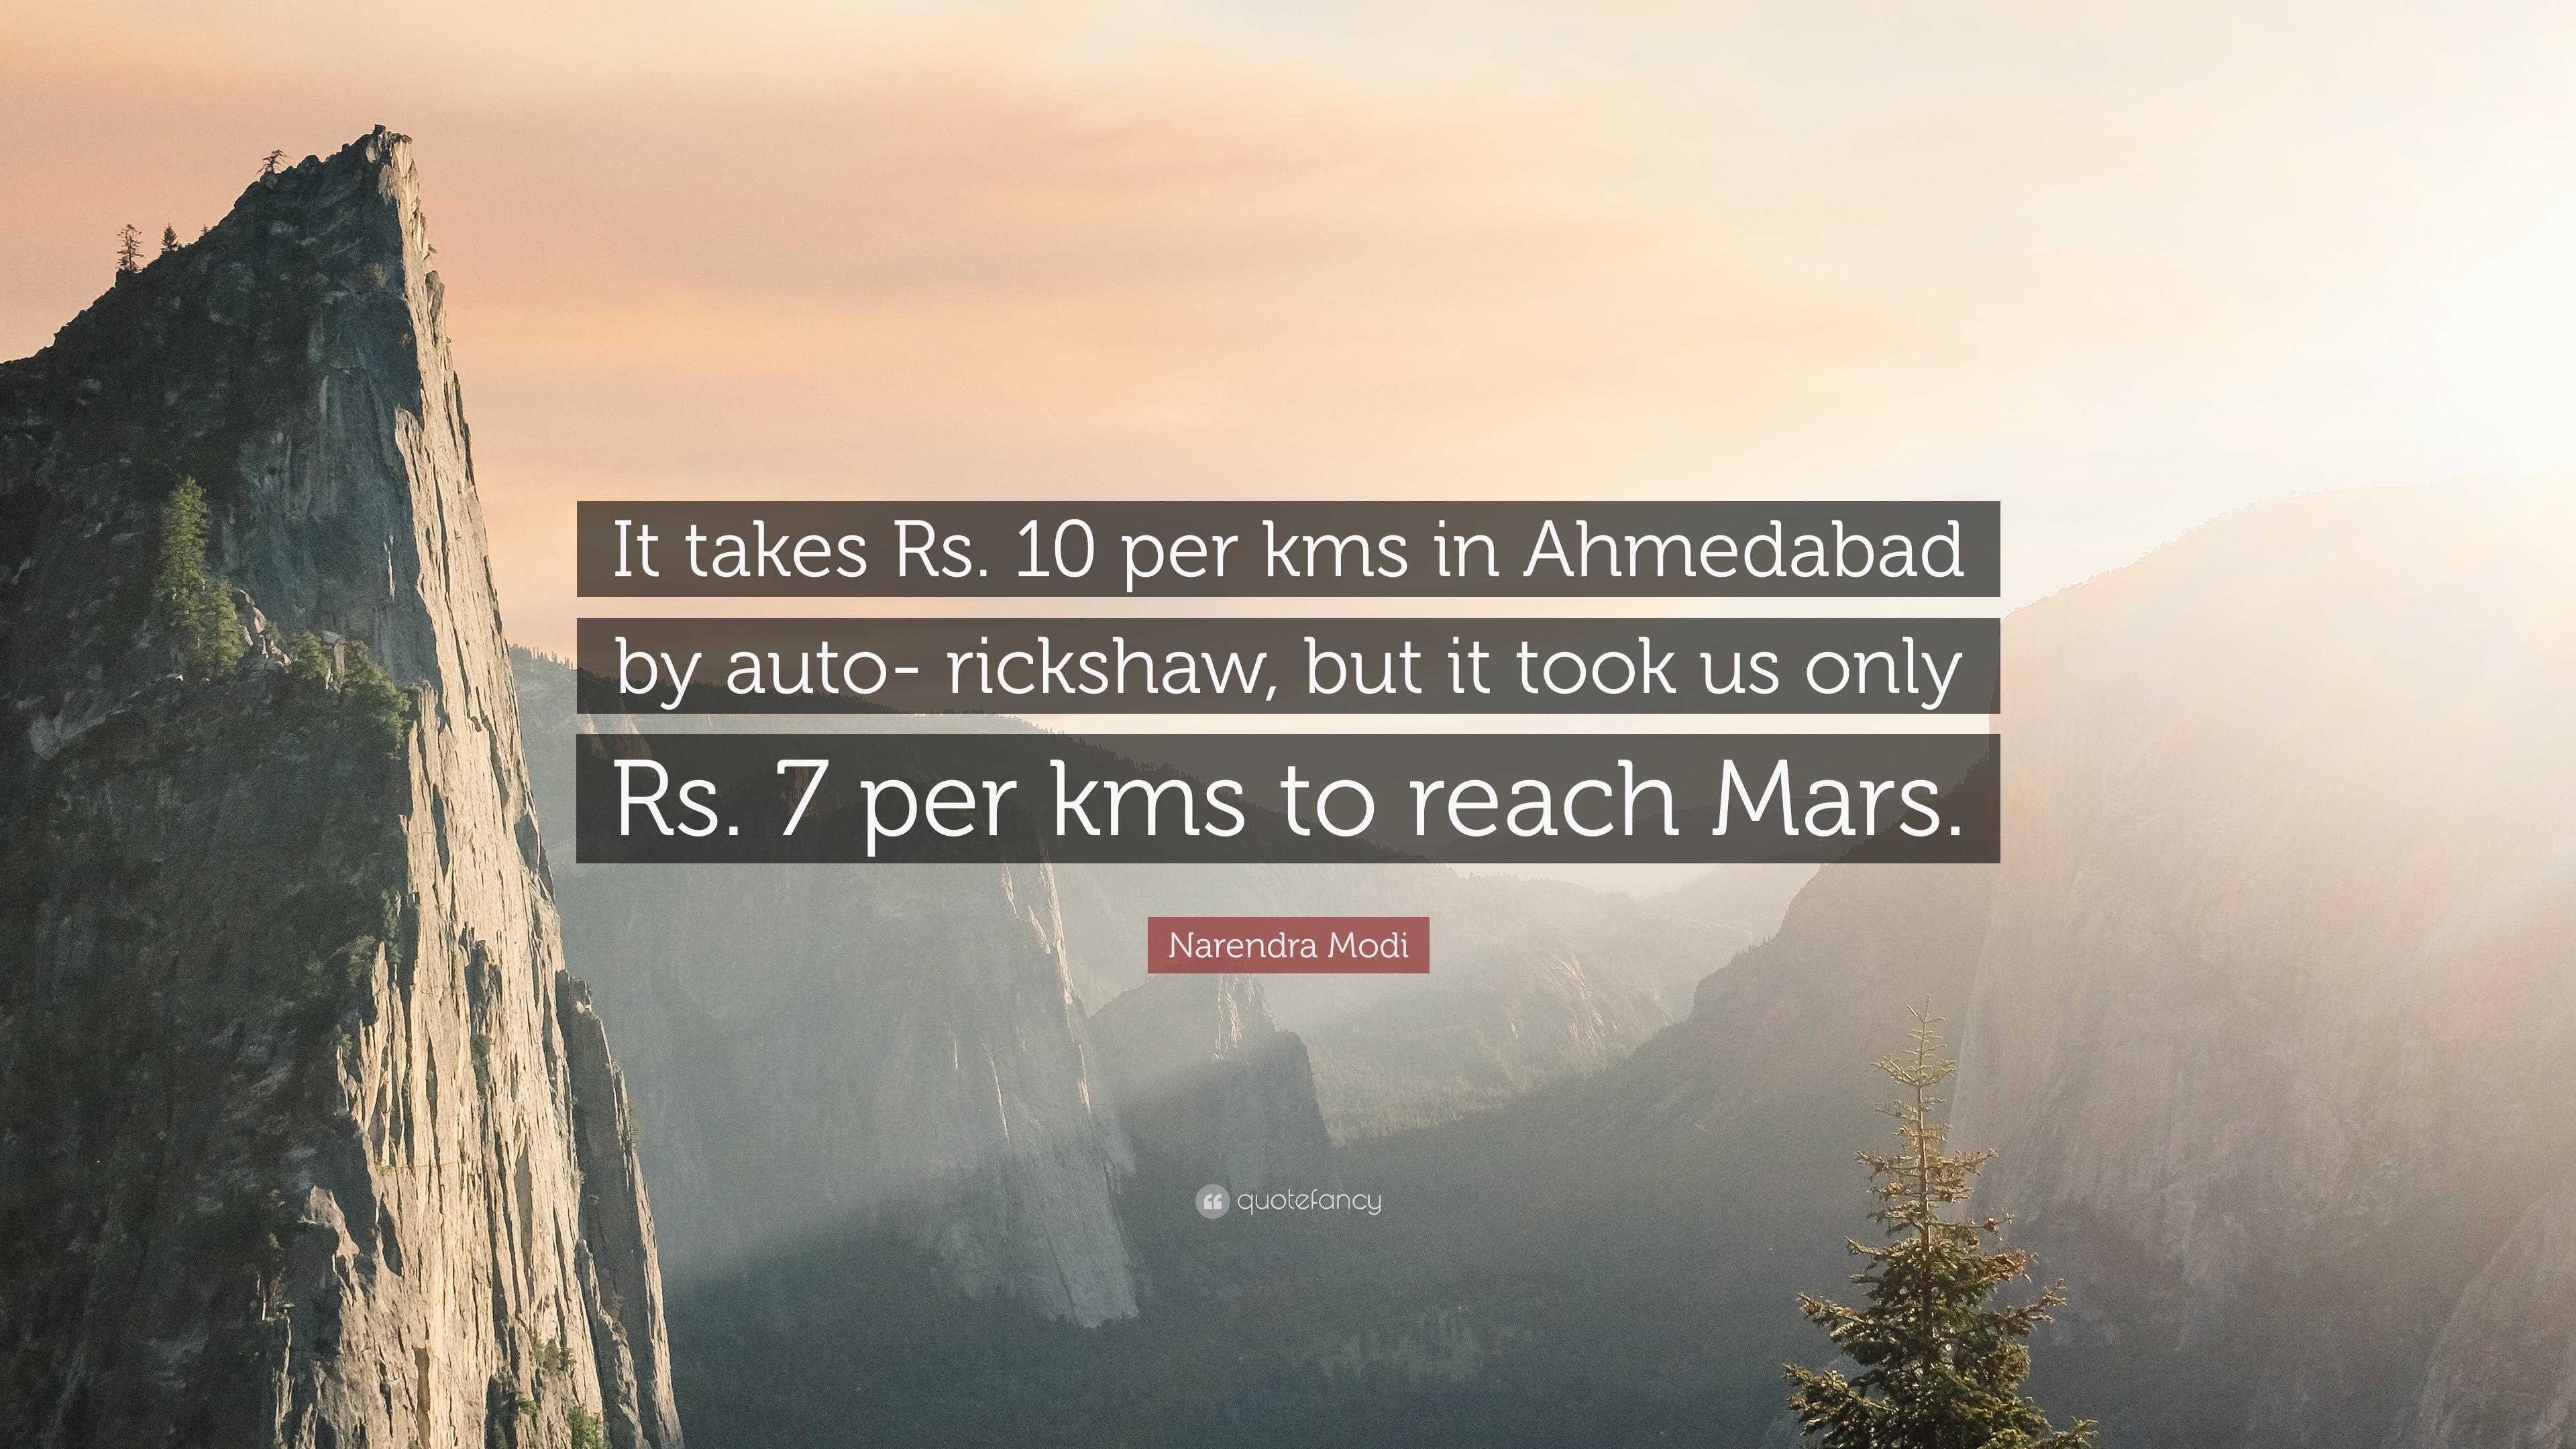 Narendra Modi Quote: “It takes Rs. 10 per kms in Ahmedabad